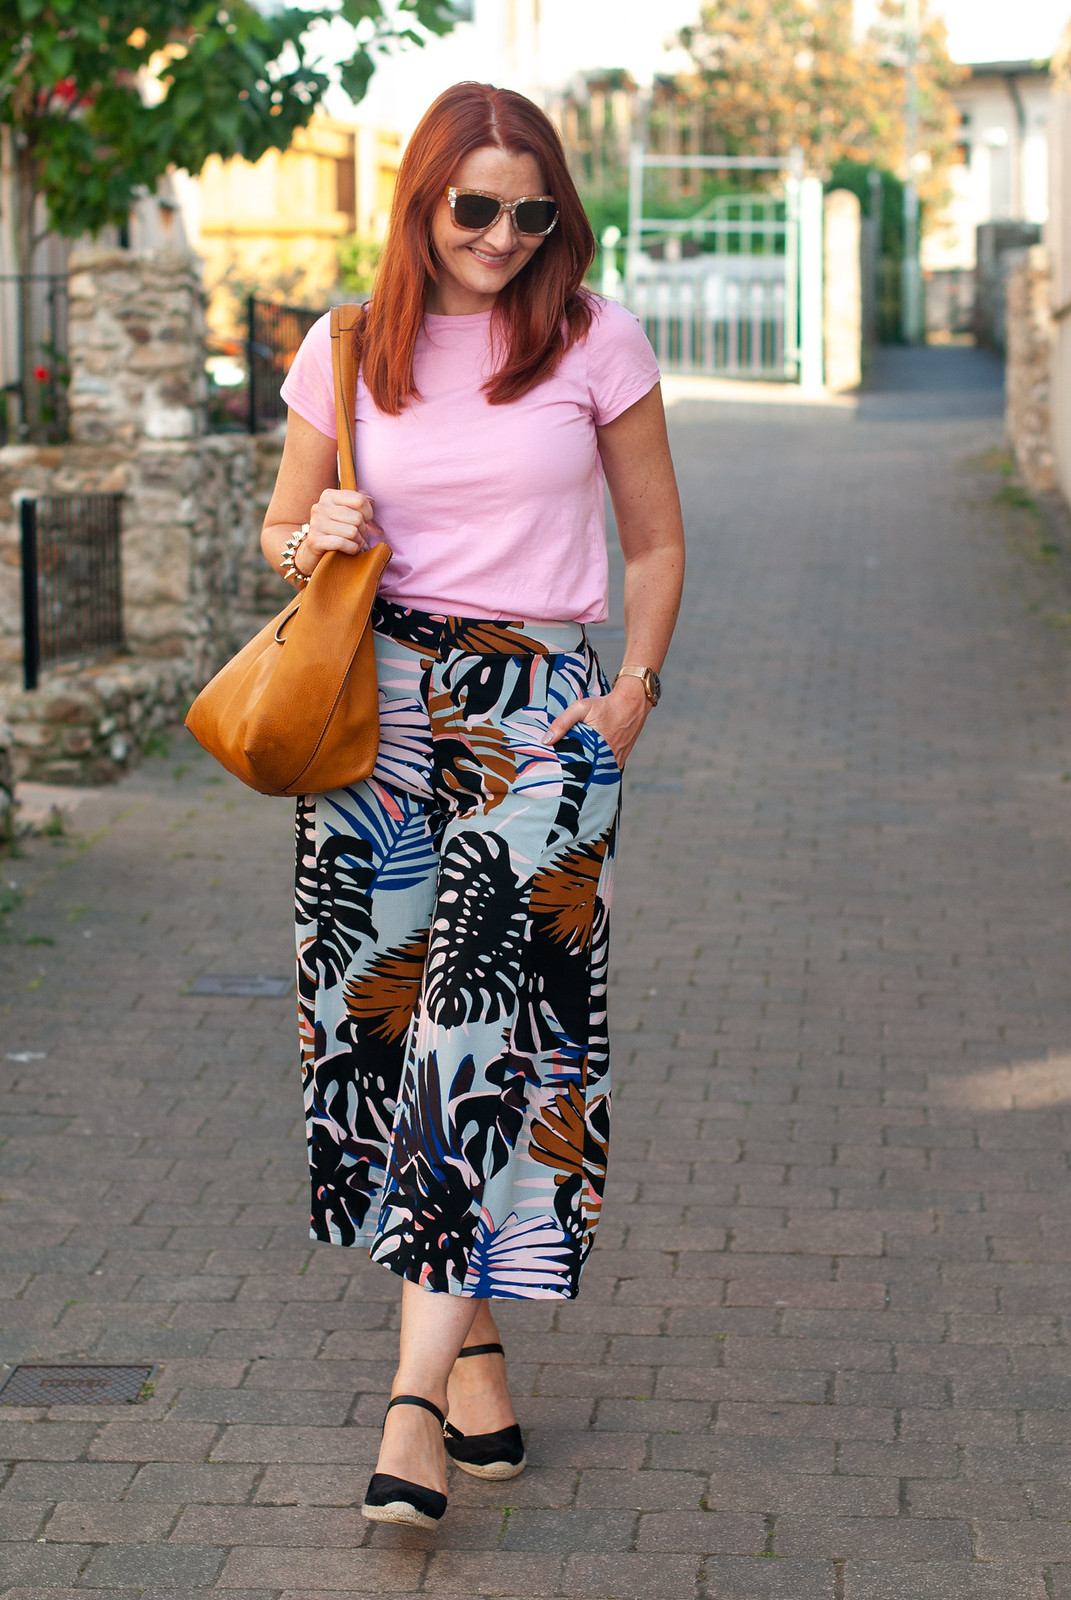 Wearing Pink With Red Hair in Summer \ candy pink t-shirt \ palm print culottes \ black wedge espadrilles \ tan hobo bag | Not Dressed As Lamb, over 40 style